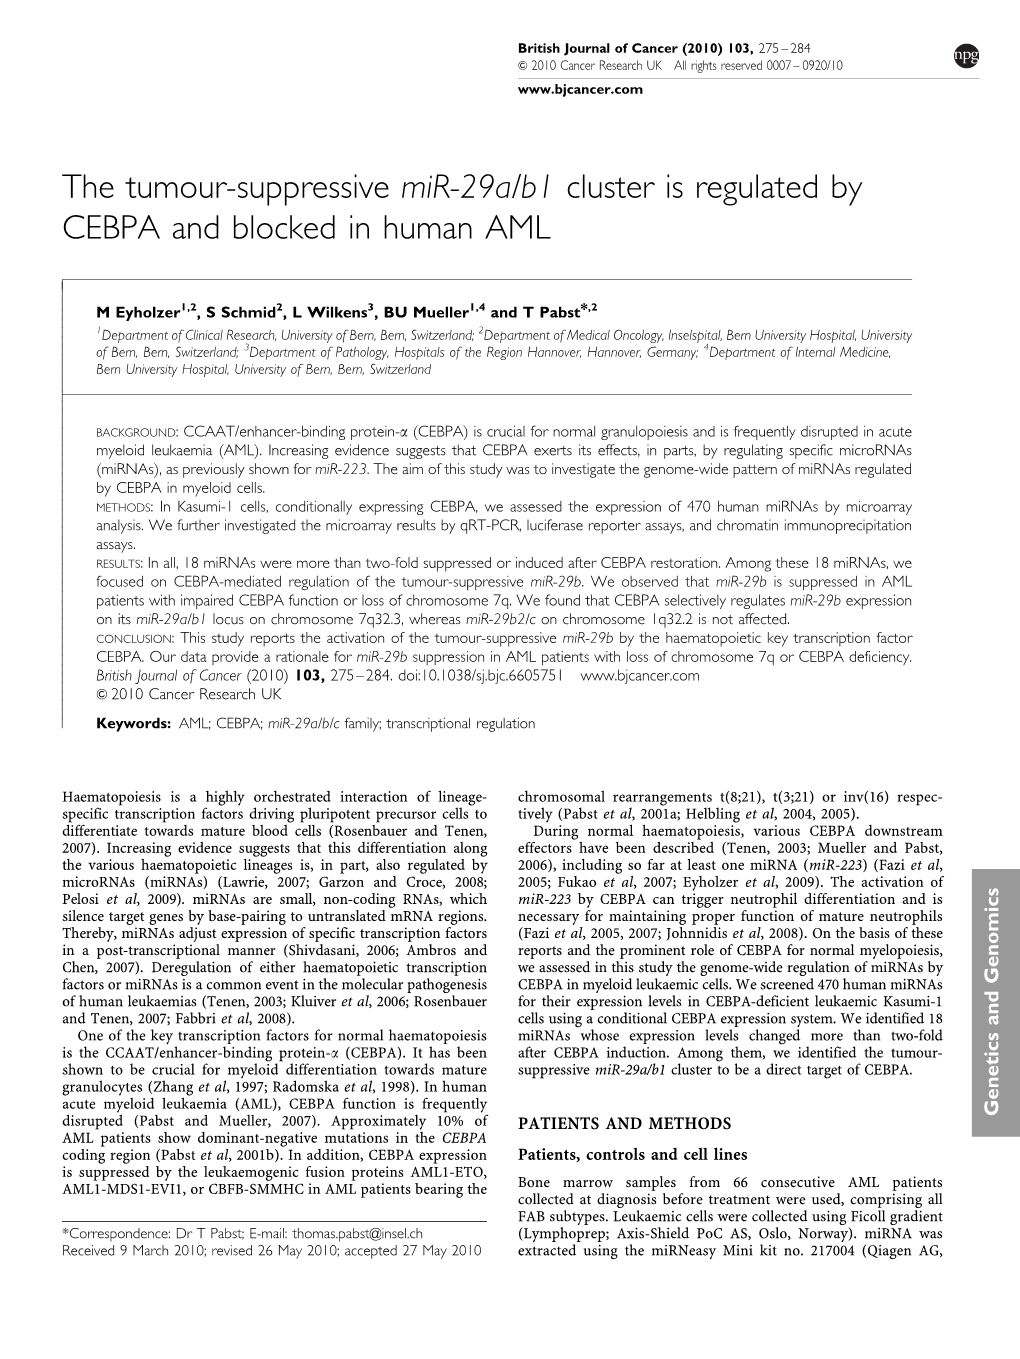 The Tumour-Suppressive Mir-29A/B1 Cluster Is Regulated by CEBPA and Blocked in Human AML